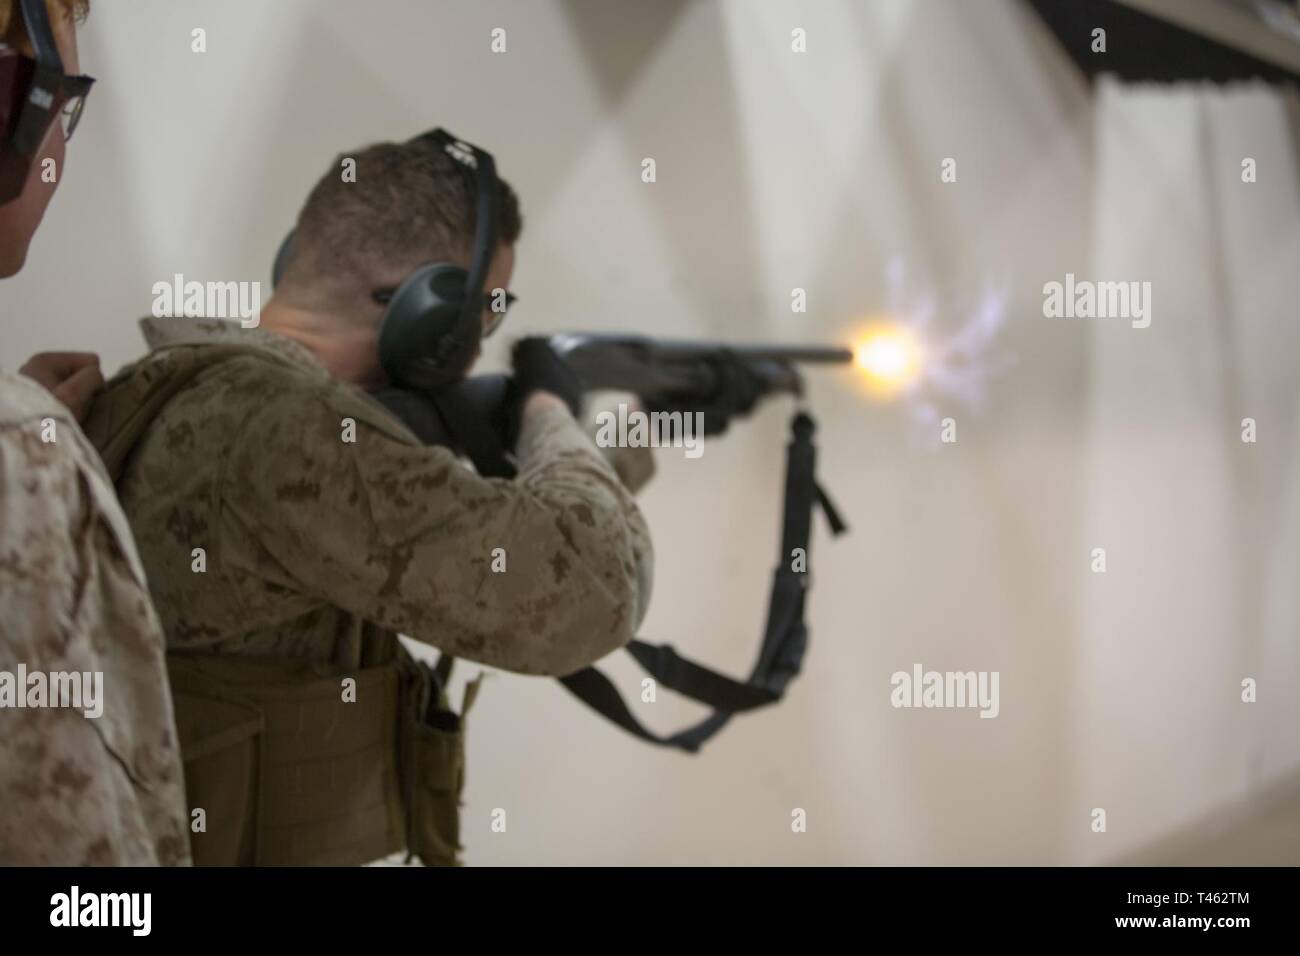 NAVAL SUPPORT ACTIVITY BAHRAIN (Feb. 28, 2019) A U.S. Marine with Fleet Anti-terrorism Security Team, Central Command fires an M500 shotgun at a target during a live-fire sustainment training range. FASTCENT provides expeditionary anti-terrorism and security forces to embassies, consulates and other vital national assets throughout the U.S. Central Command area of responsibility. Stock Photo